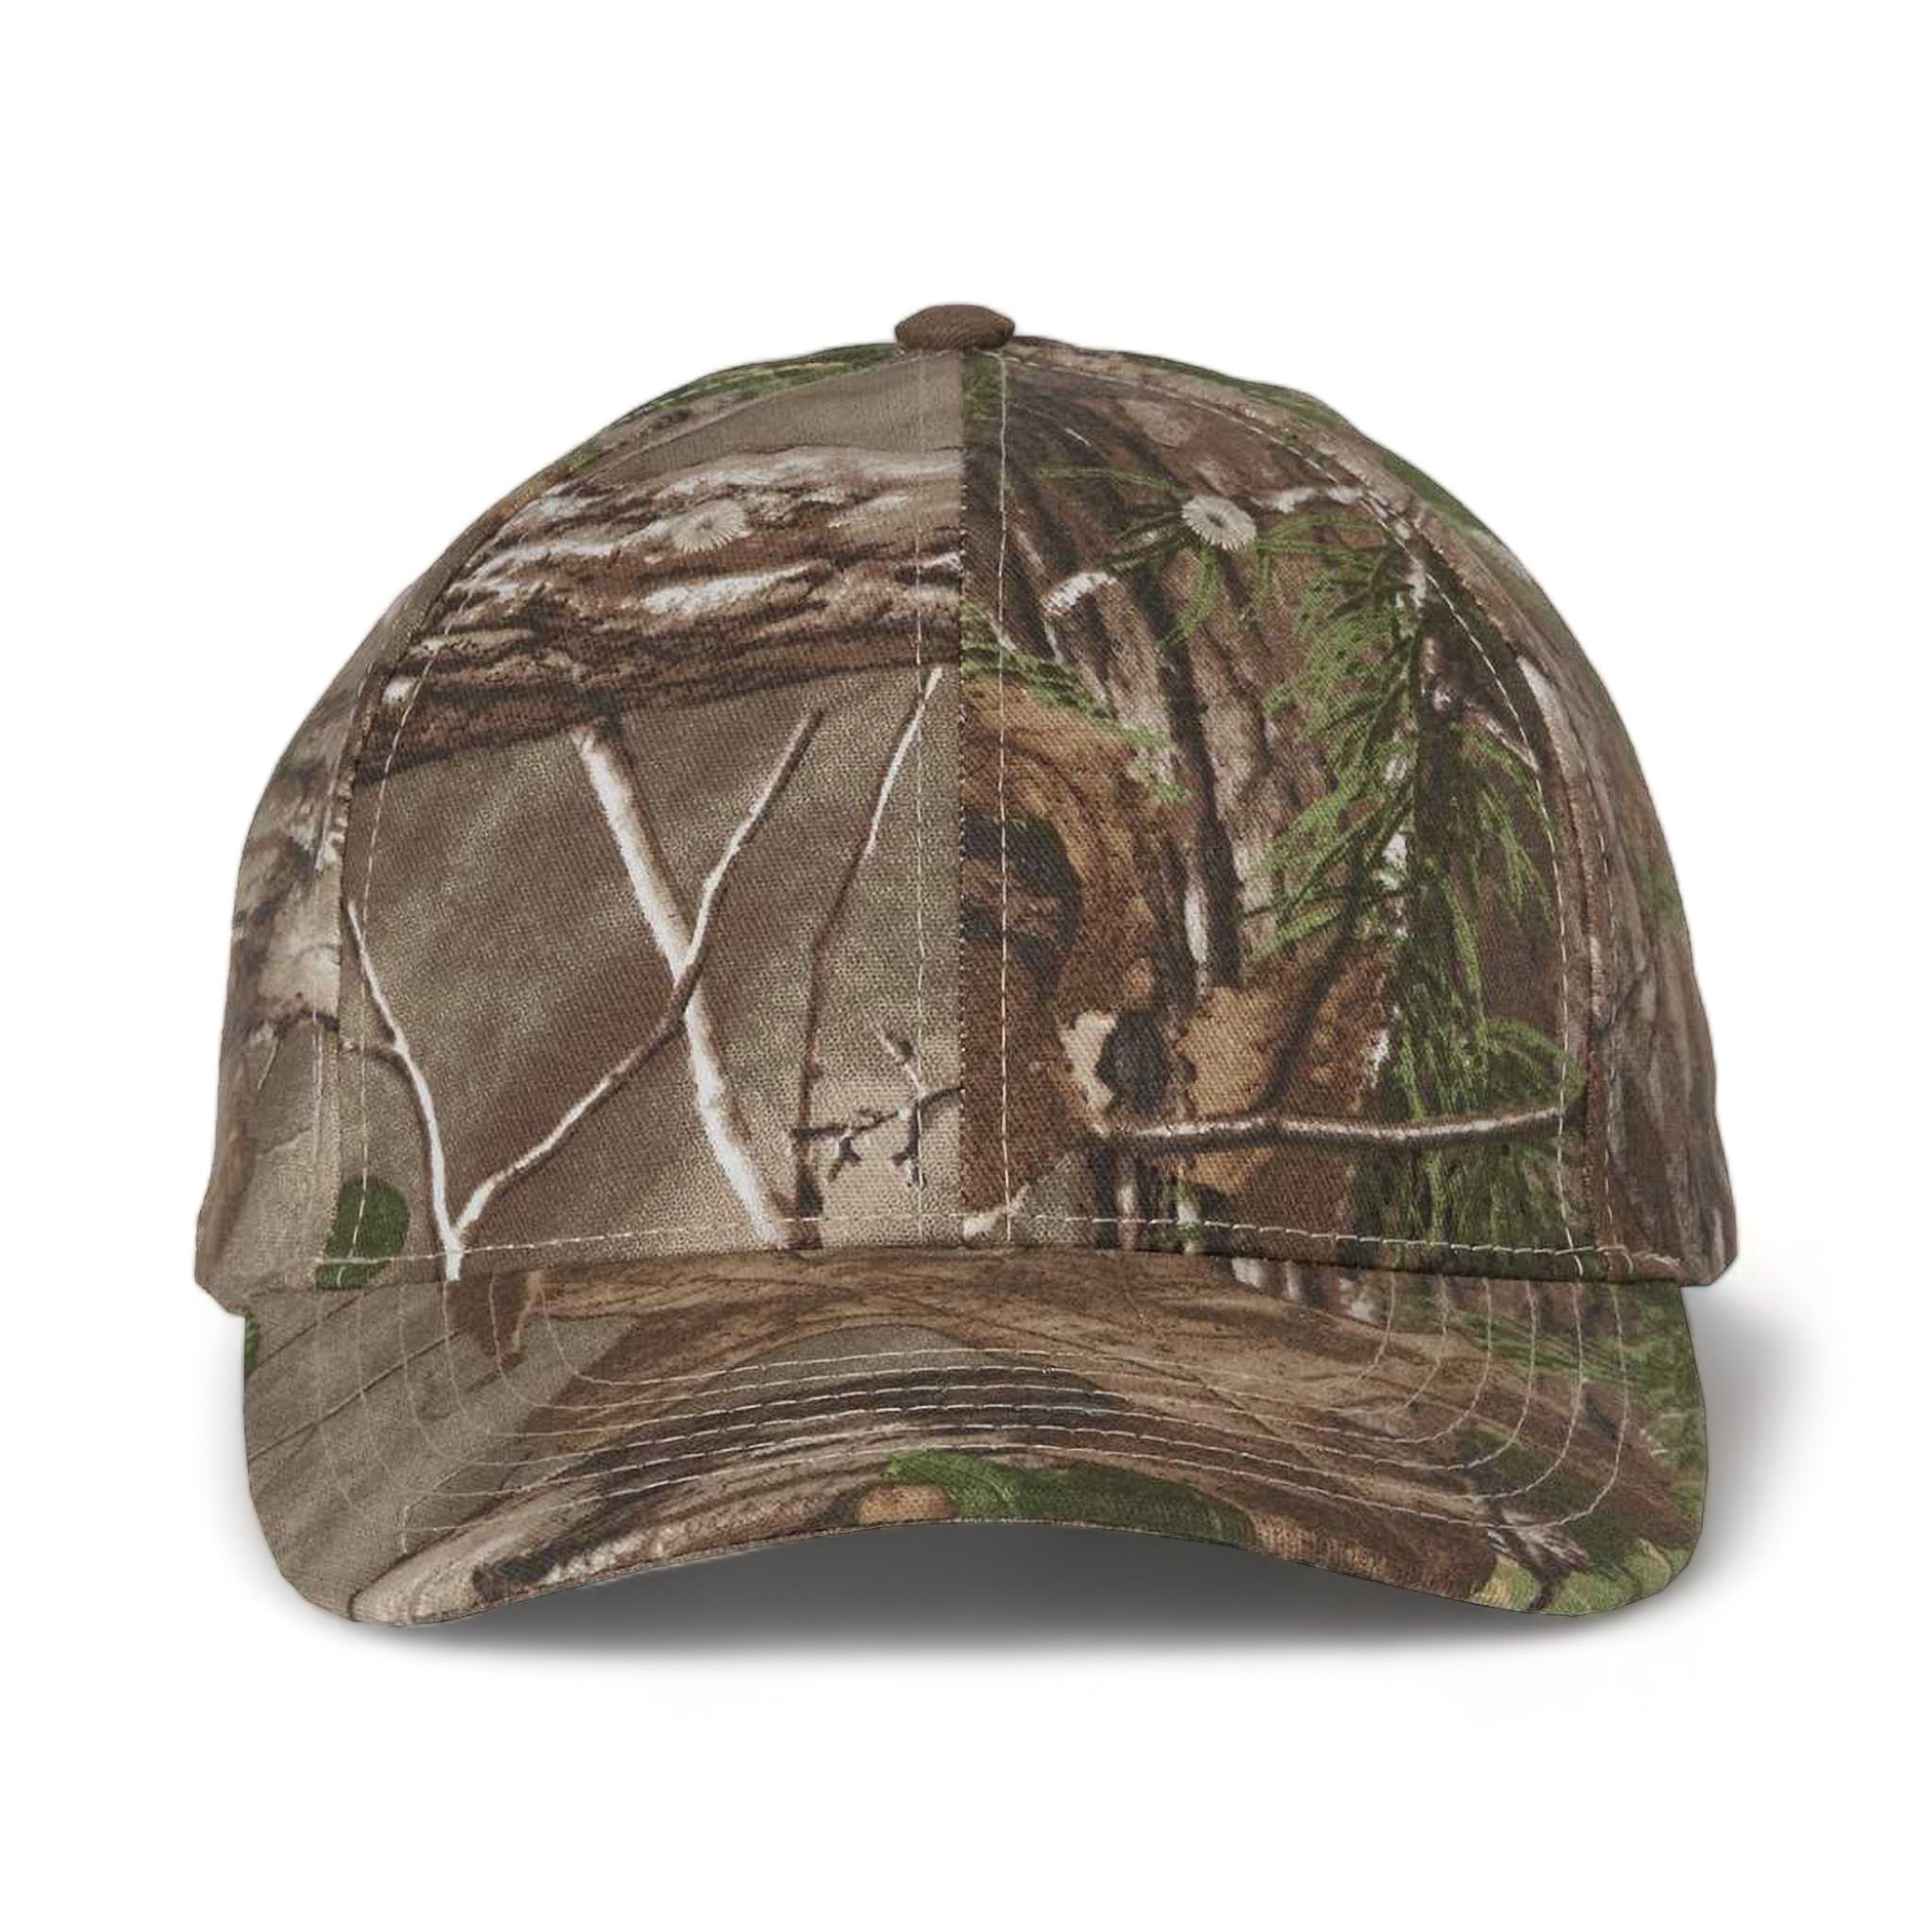 Front view of Kati LC10 custom hat in realtree xtra green